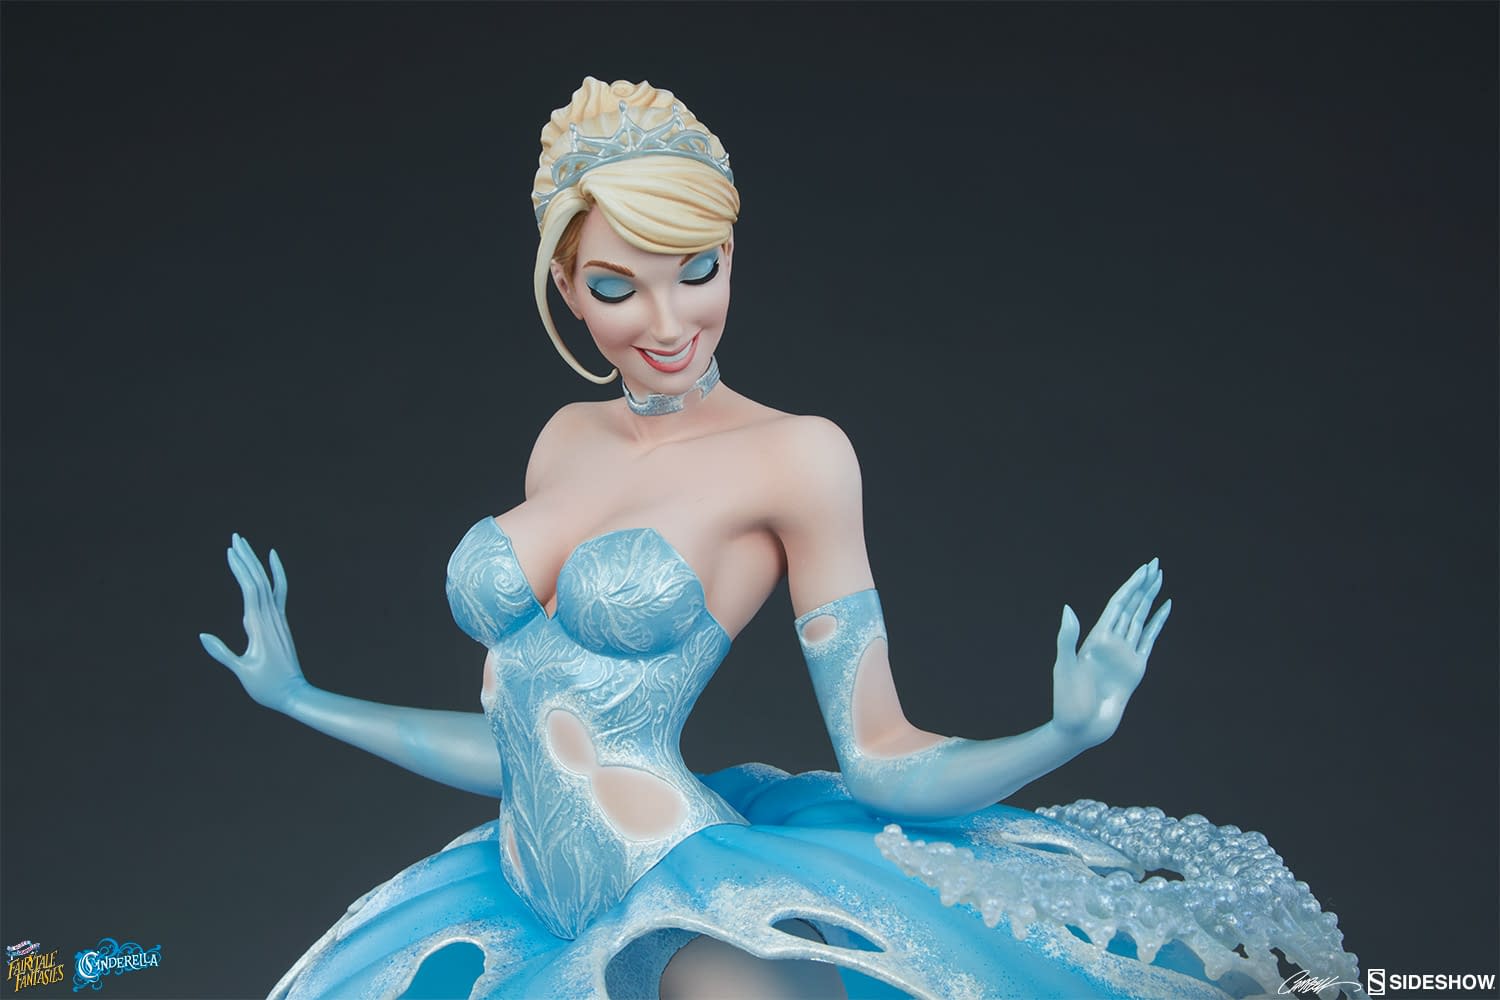 Cinderella J. Scott Campbell Statue from Sideshow Collectibles